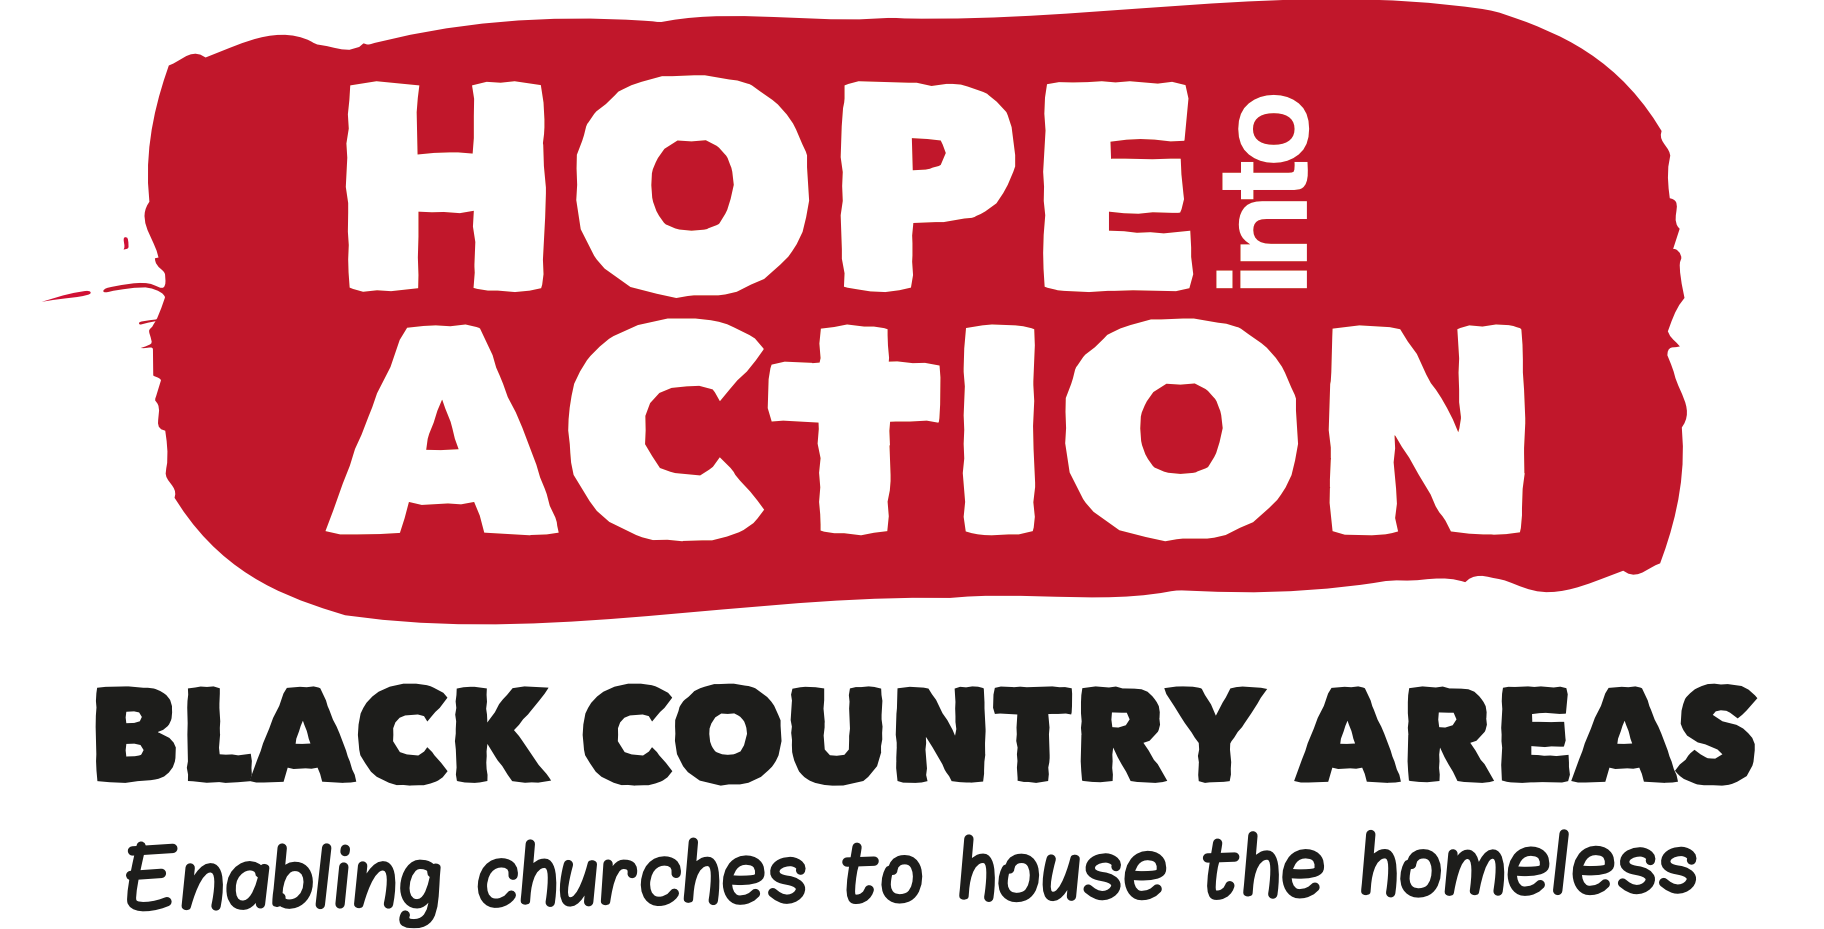 Hope into Action: Black Country Areas